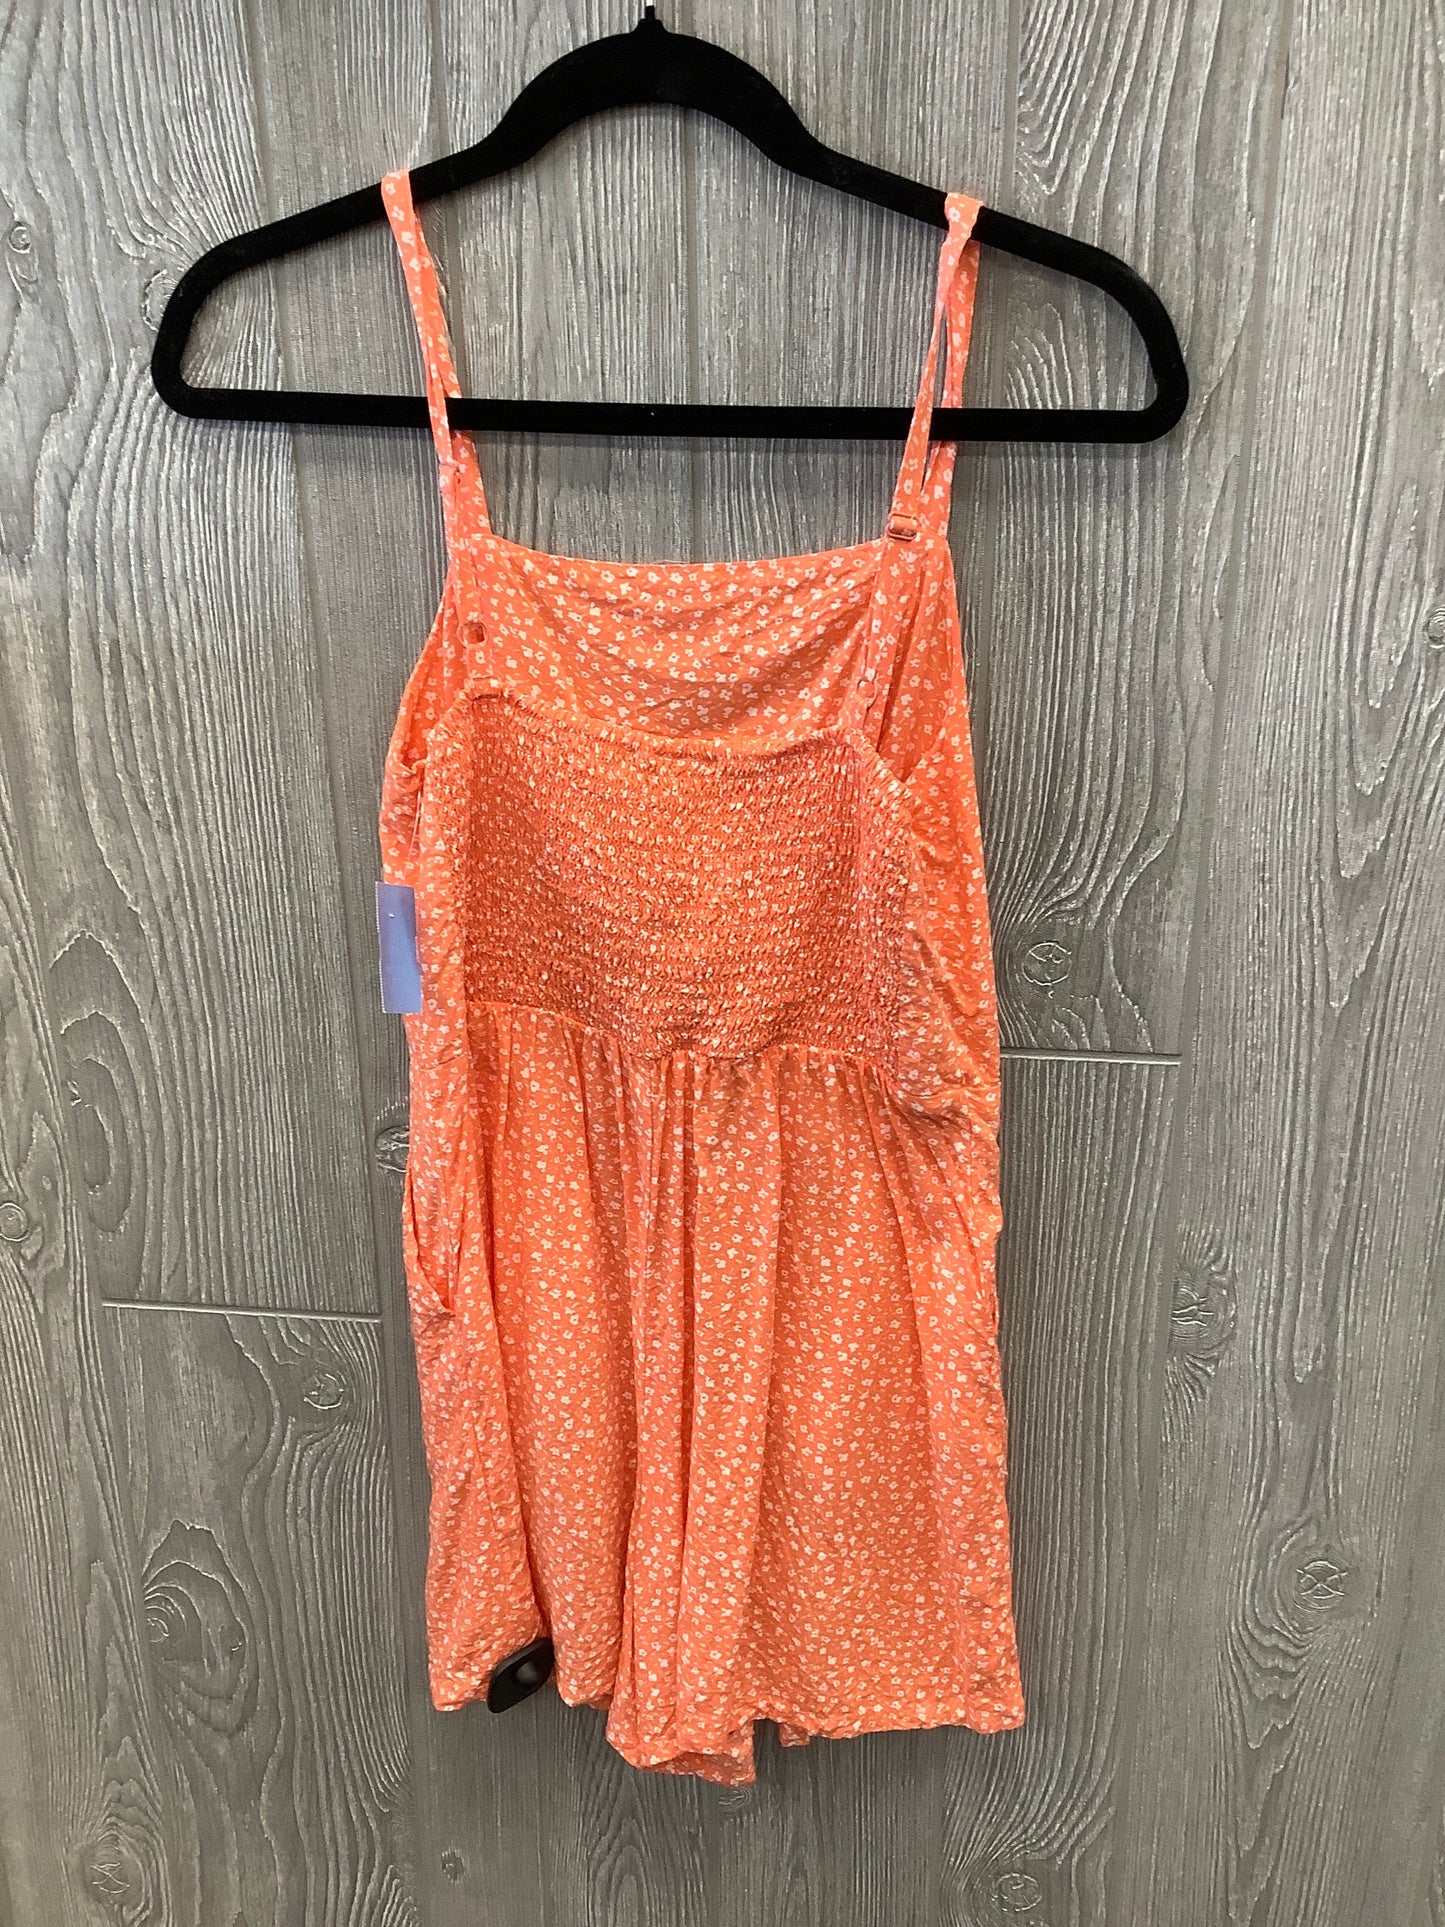 Romper By Old Navy  Size: S